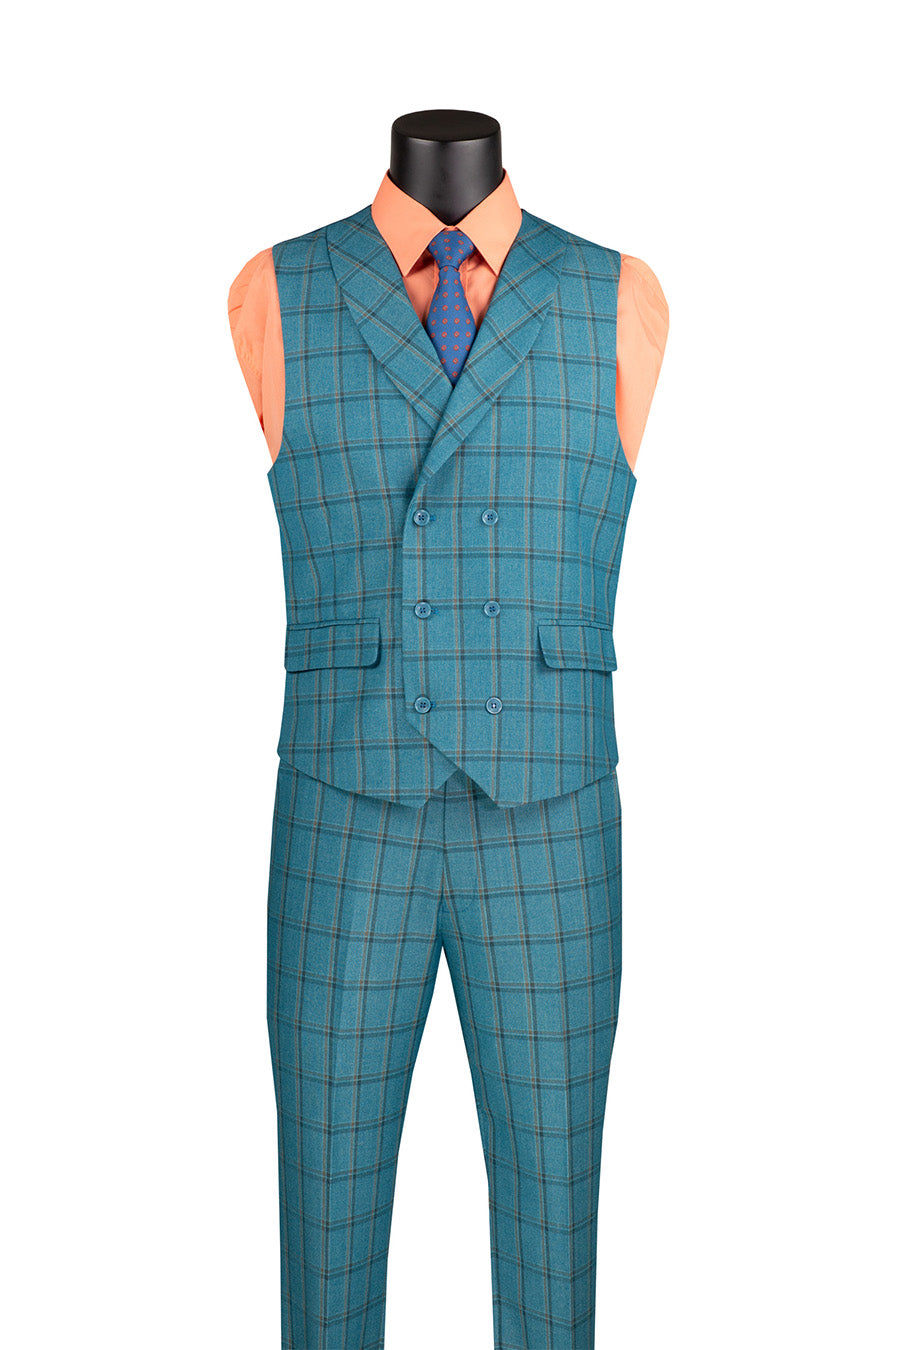 Lazio Collection - Modern Fit Windowpane Suit 3 Piece in Teal Blue